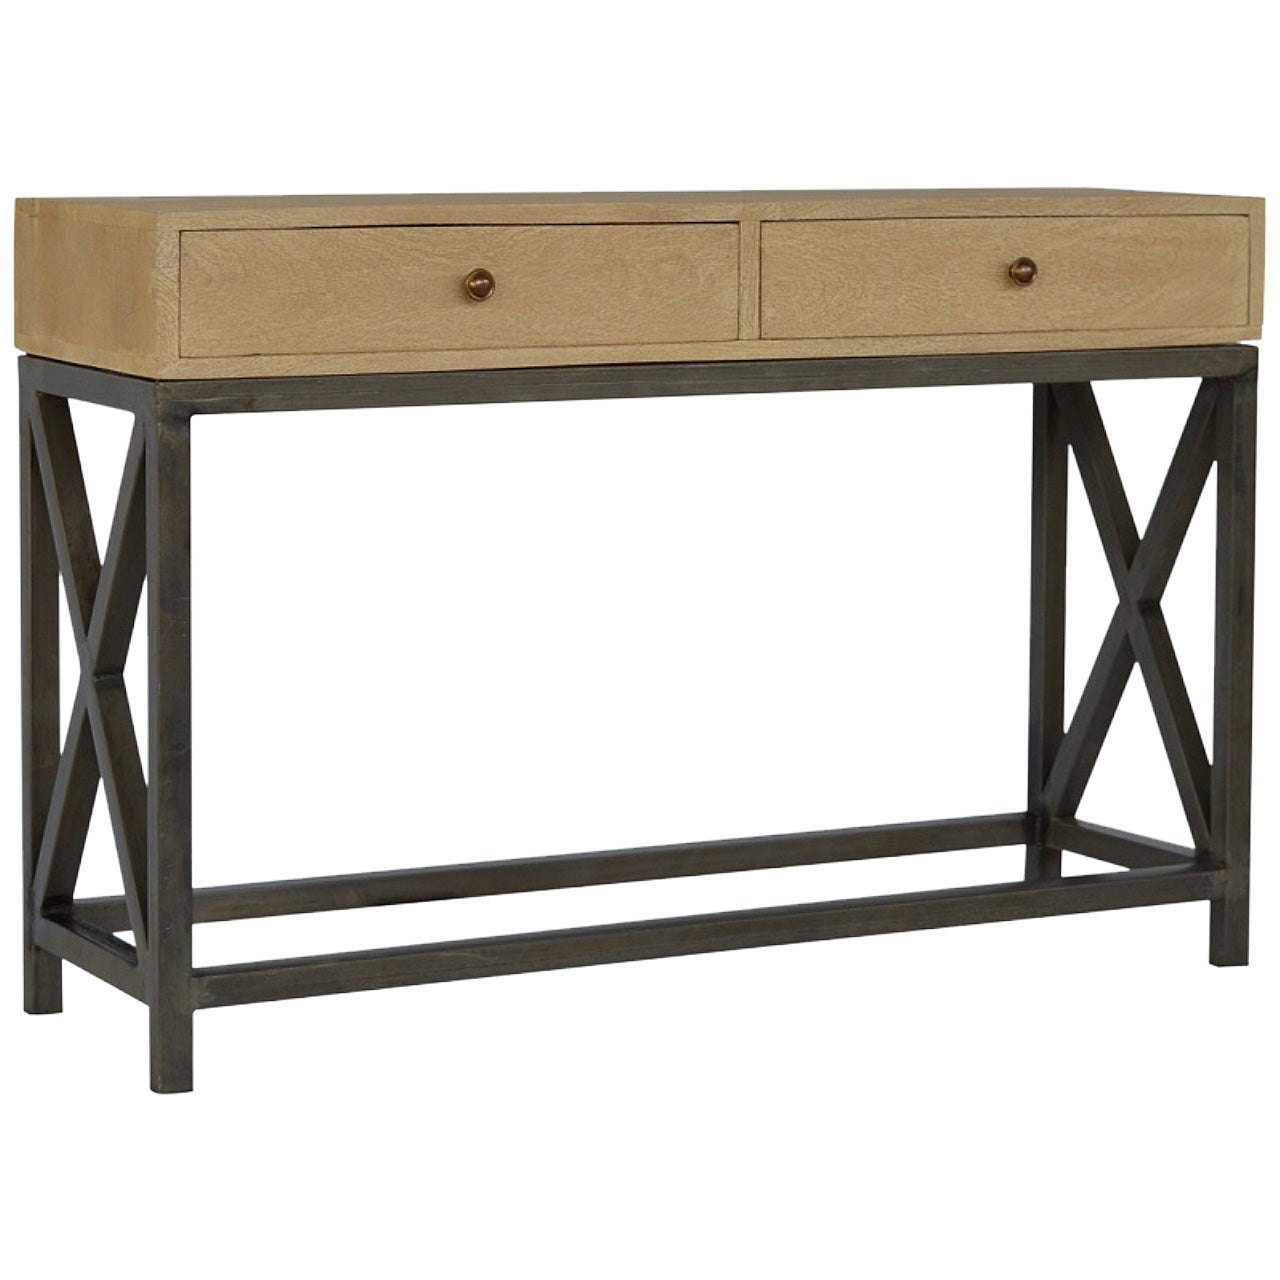 View Mango Wood Metal Base Console Table information